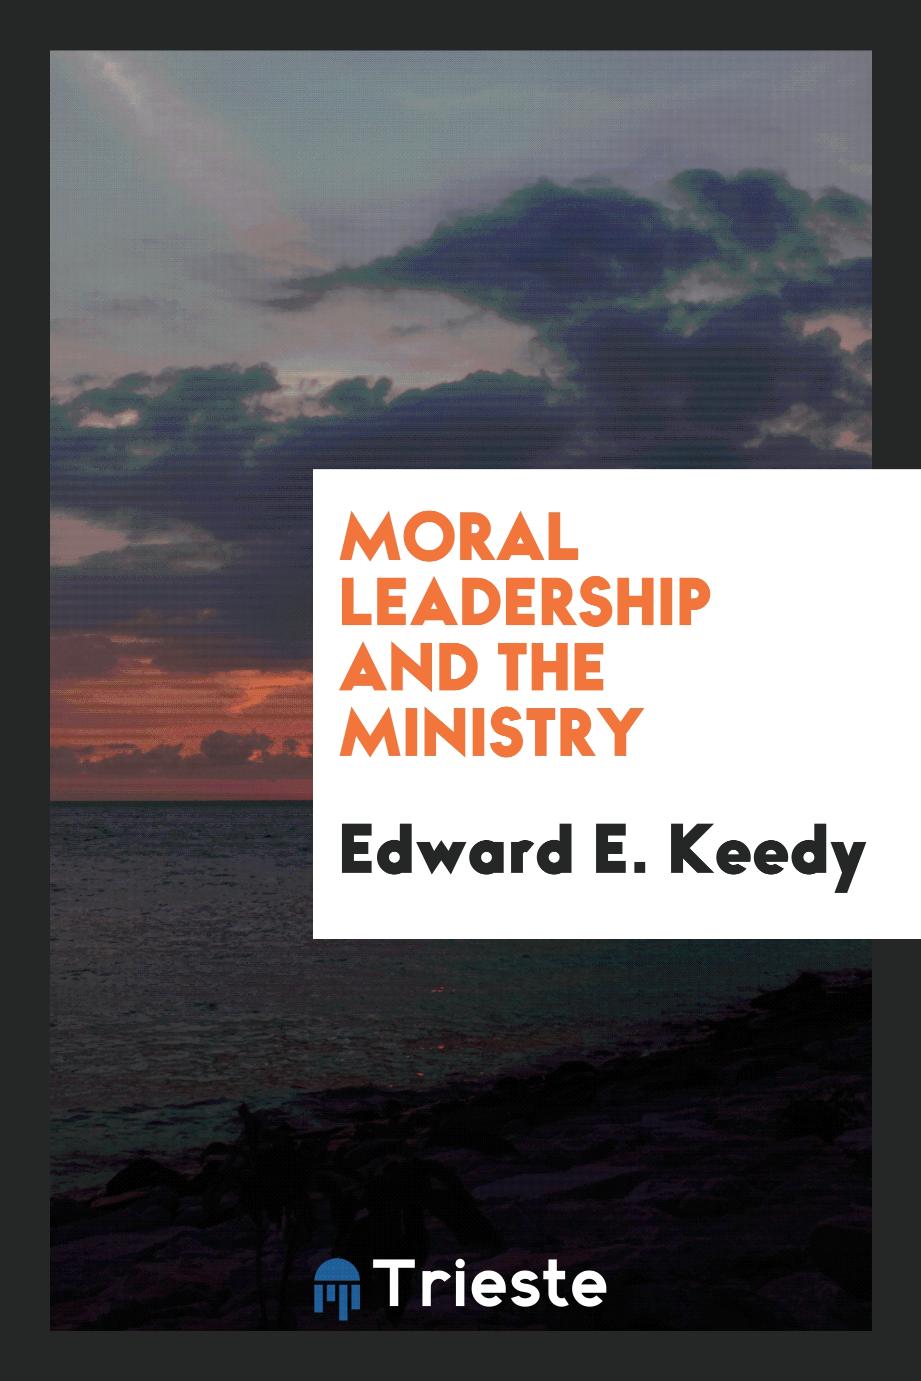 Moral leadership and the ministry